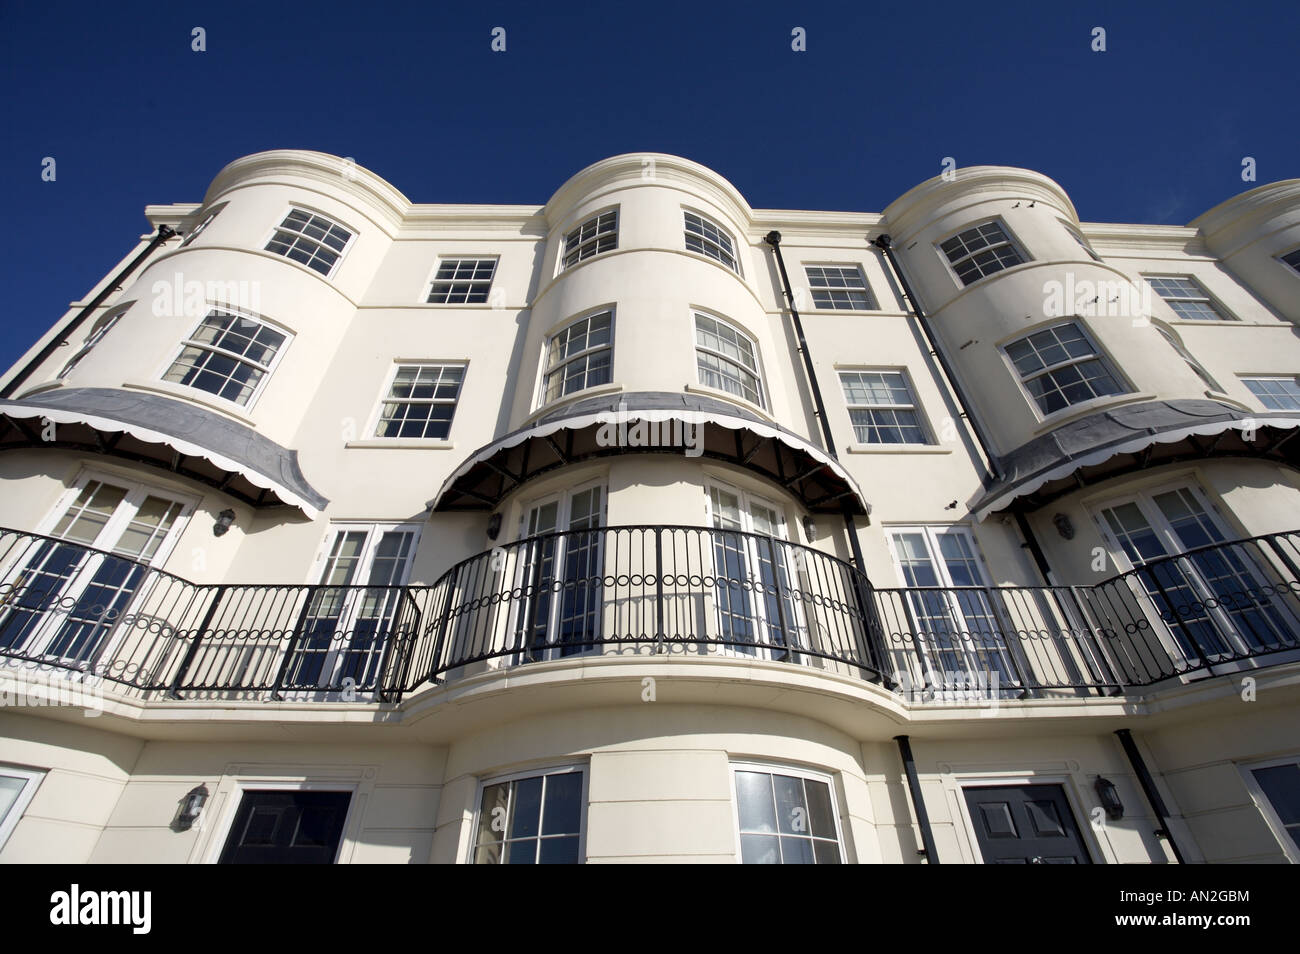 Terrasse Balcon Maisons regency Worthing Banque D'Images